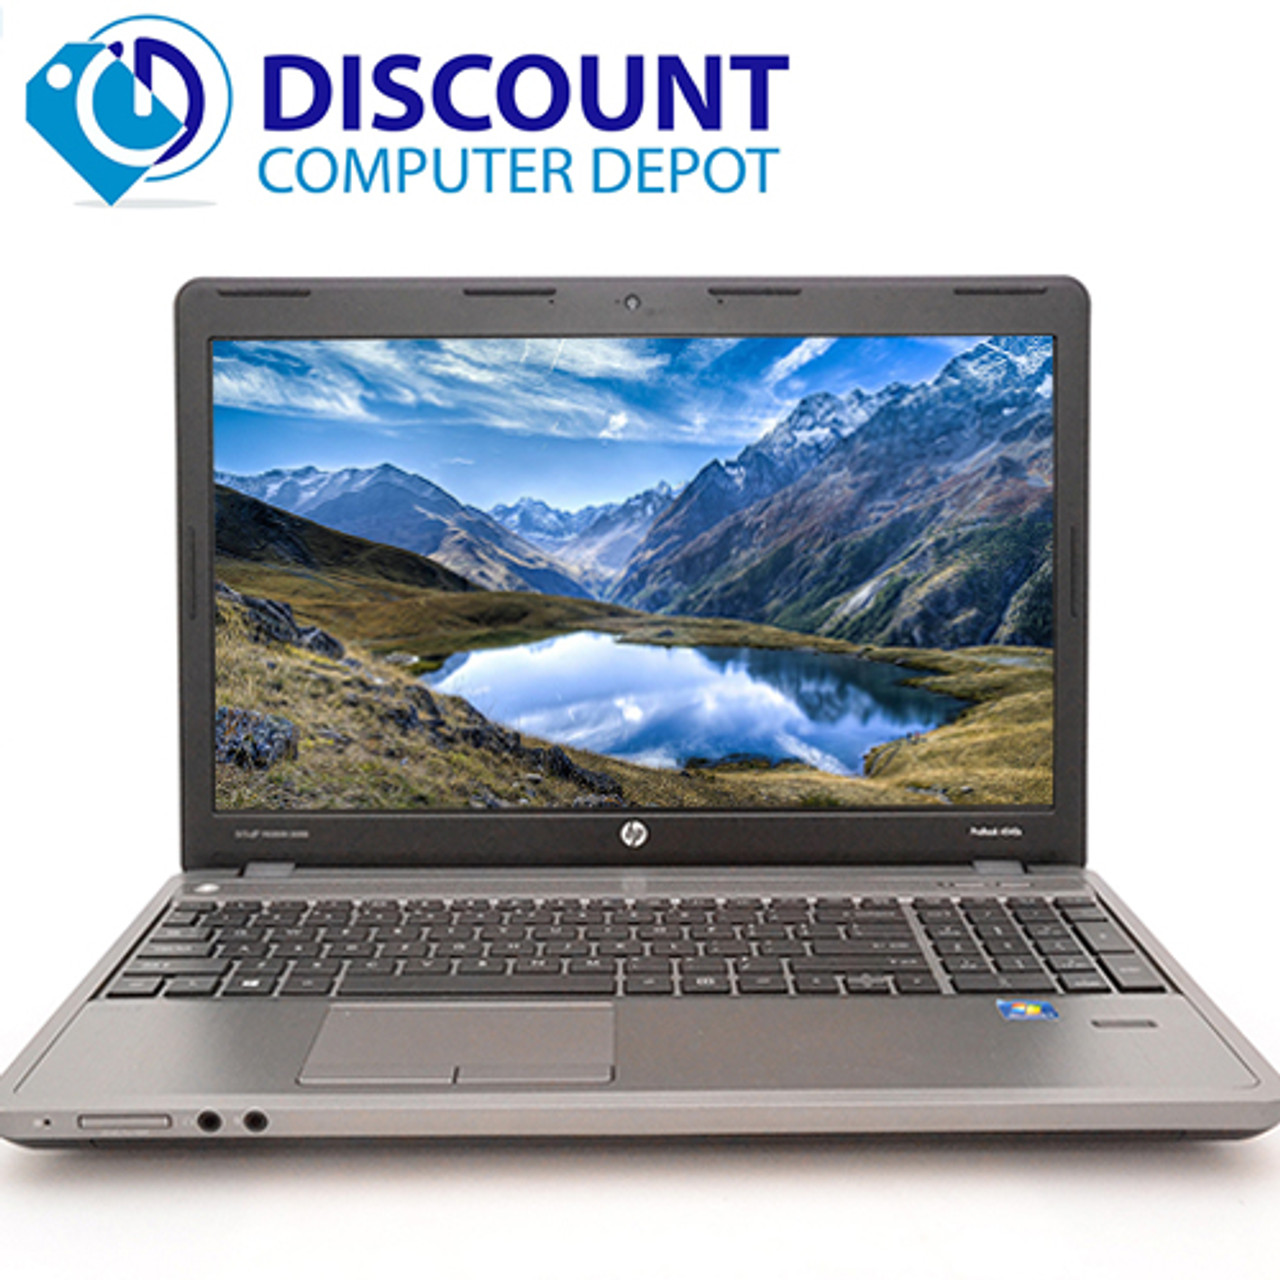 HP ProBook 4530s 15.6 Laptop Notebook Intel i3-2370M 2.1GHz 4GB 500GB HDMI  and WIFI